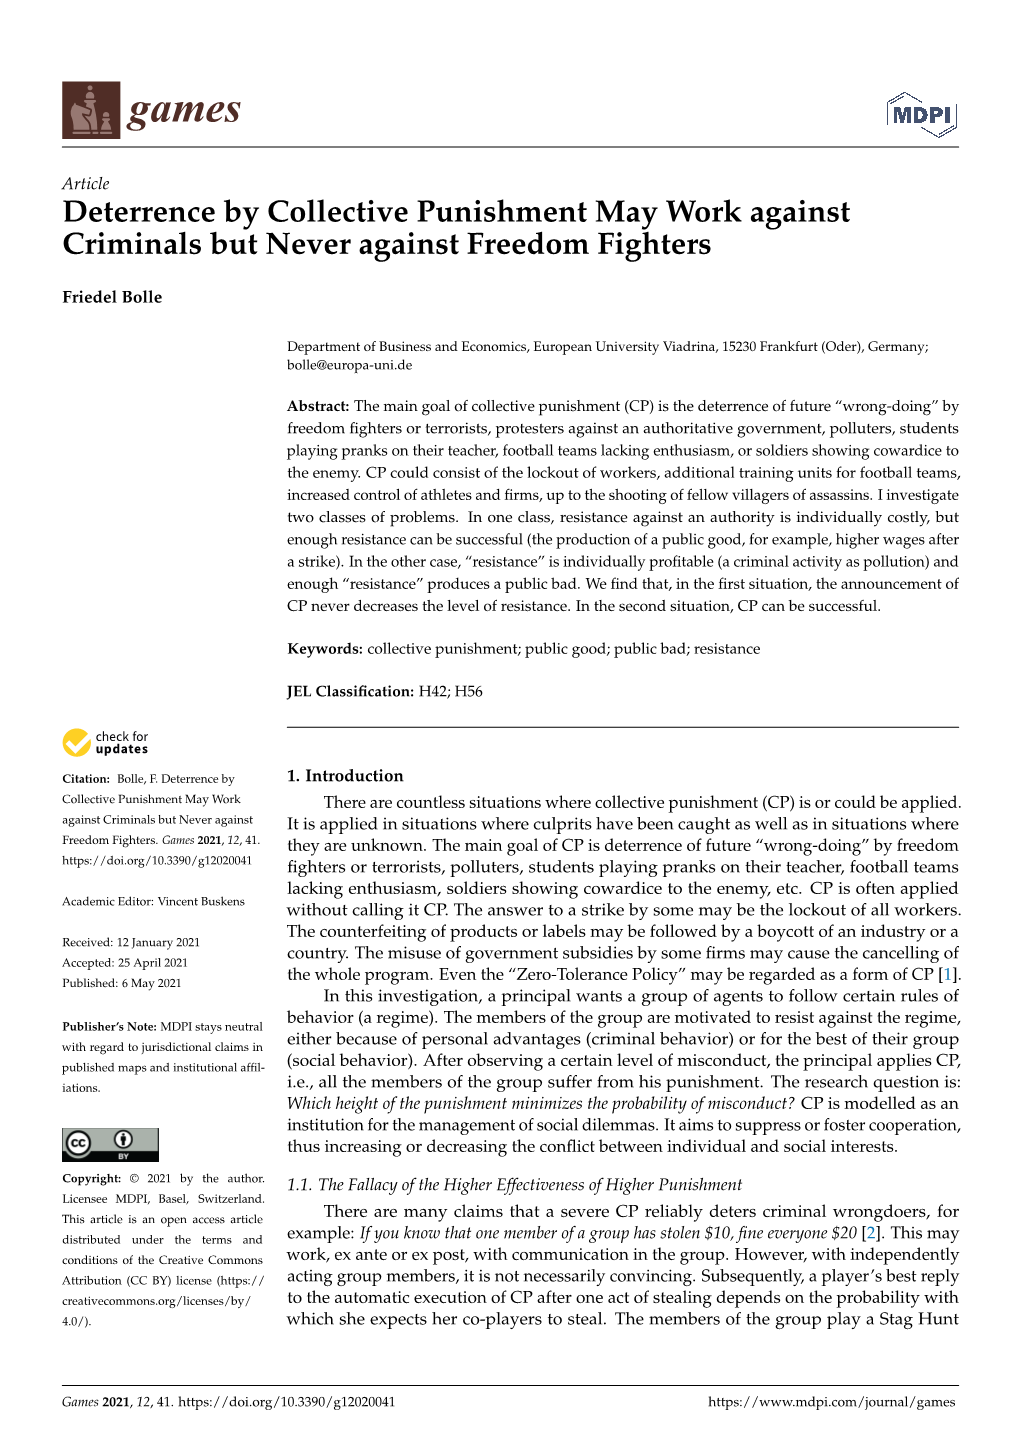 Deterrence by Collective Punishment May Work Against Criminals but Never Against Freedom Fighters